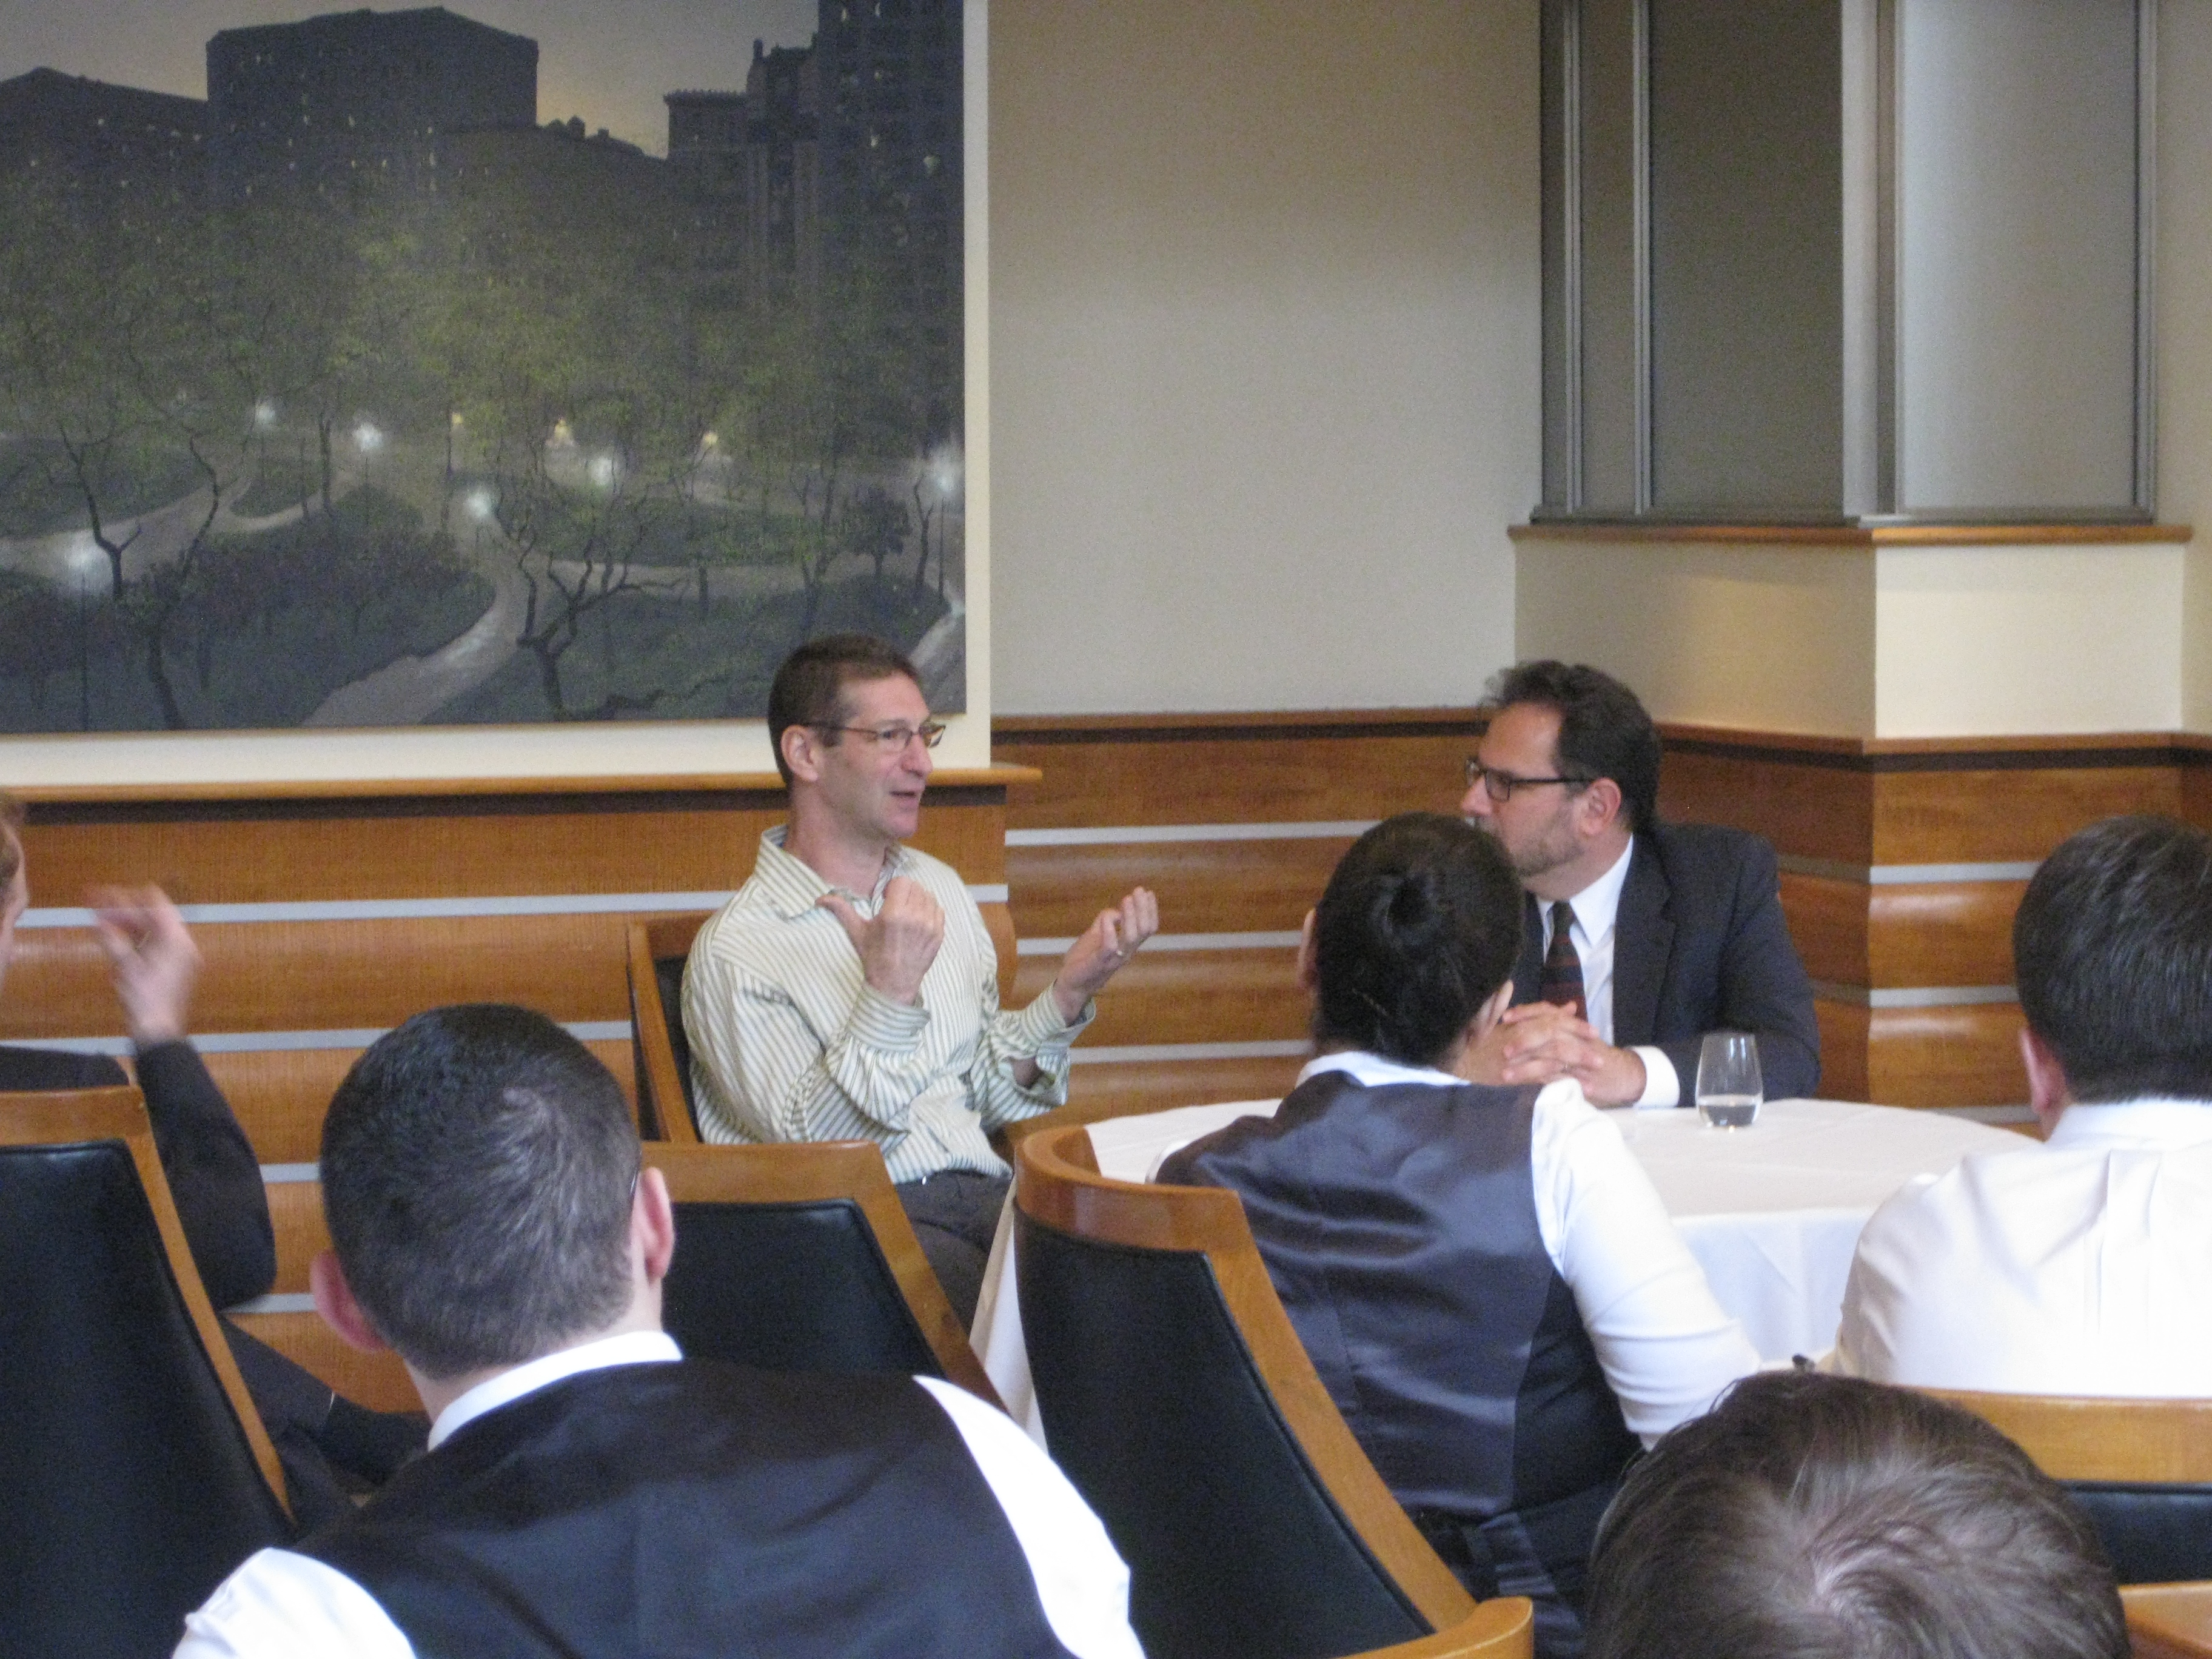 David Waltuck and I, speaking to the Eleven Madison Park team at a "Happy Hour" talk.  